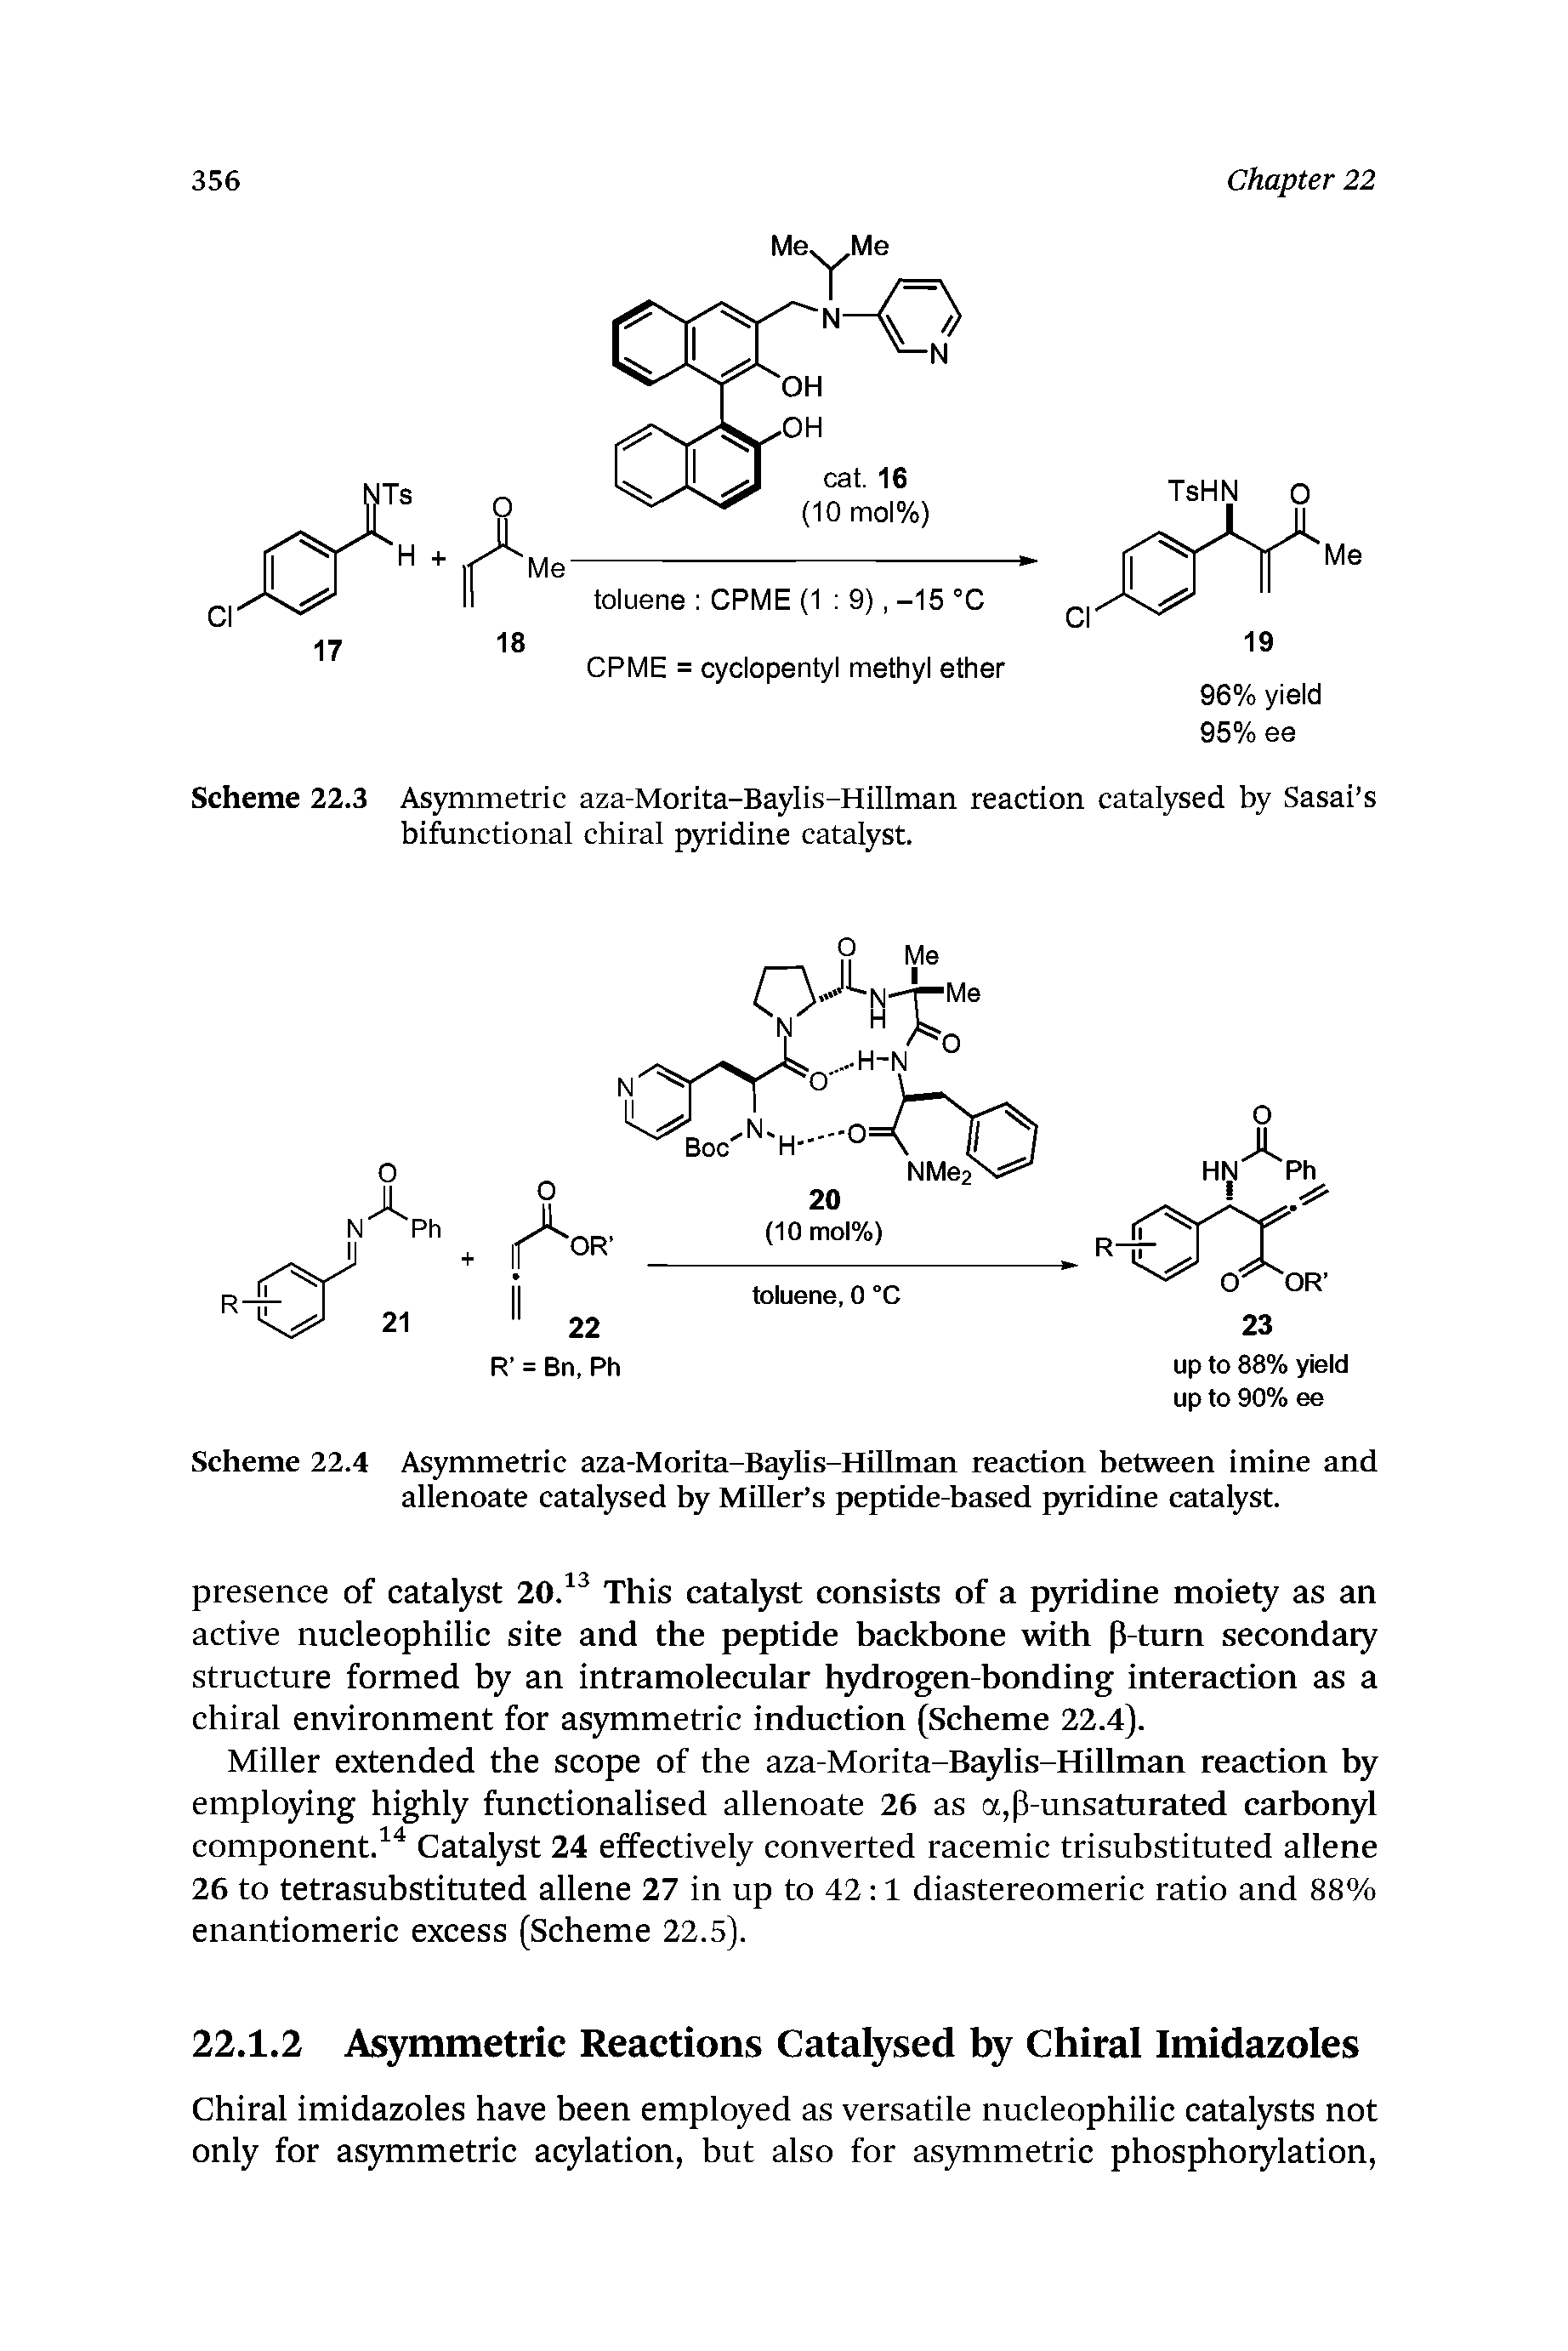 Scheme 22.4 Asymmetric aza-Morita-Baylis-Hillman reaction between imine and allenoate catalysed by Miller s peptide-based pyridine catalyst.